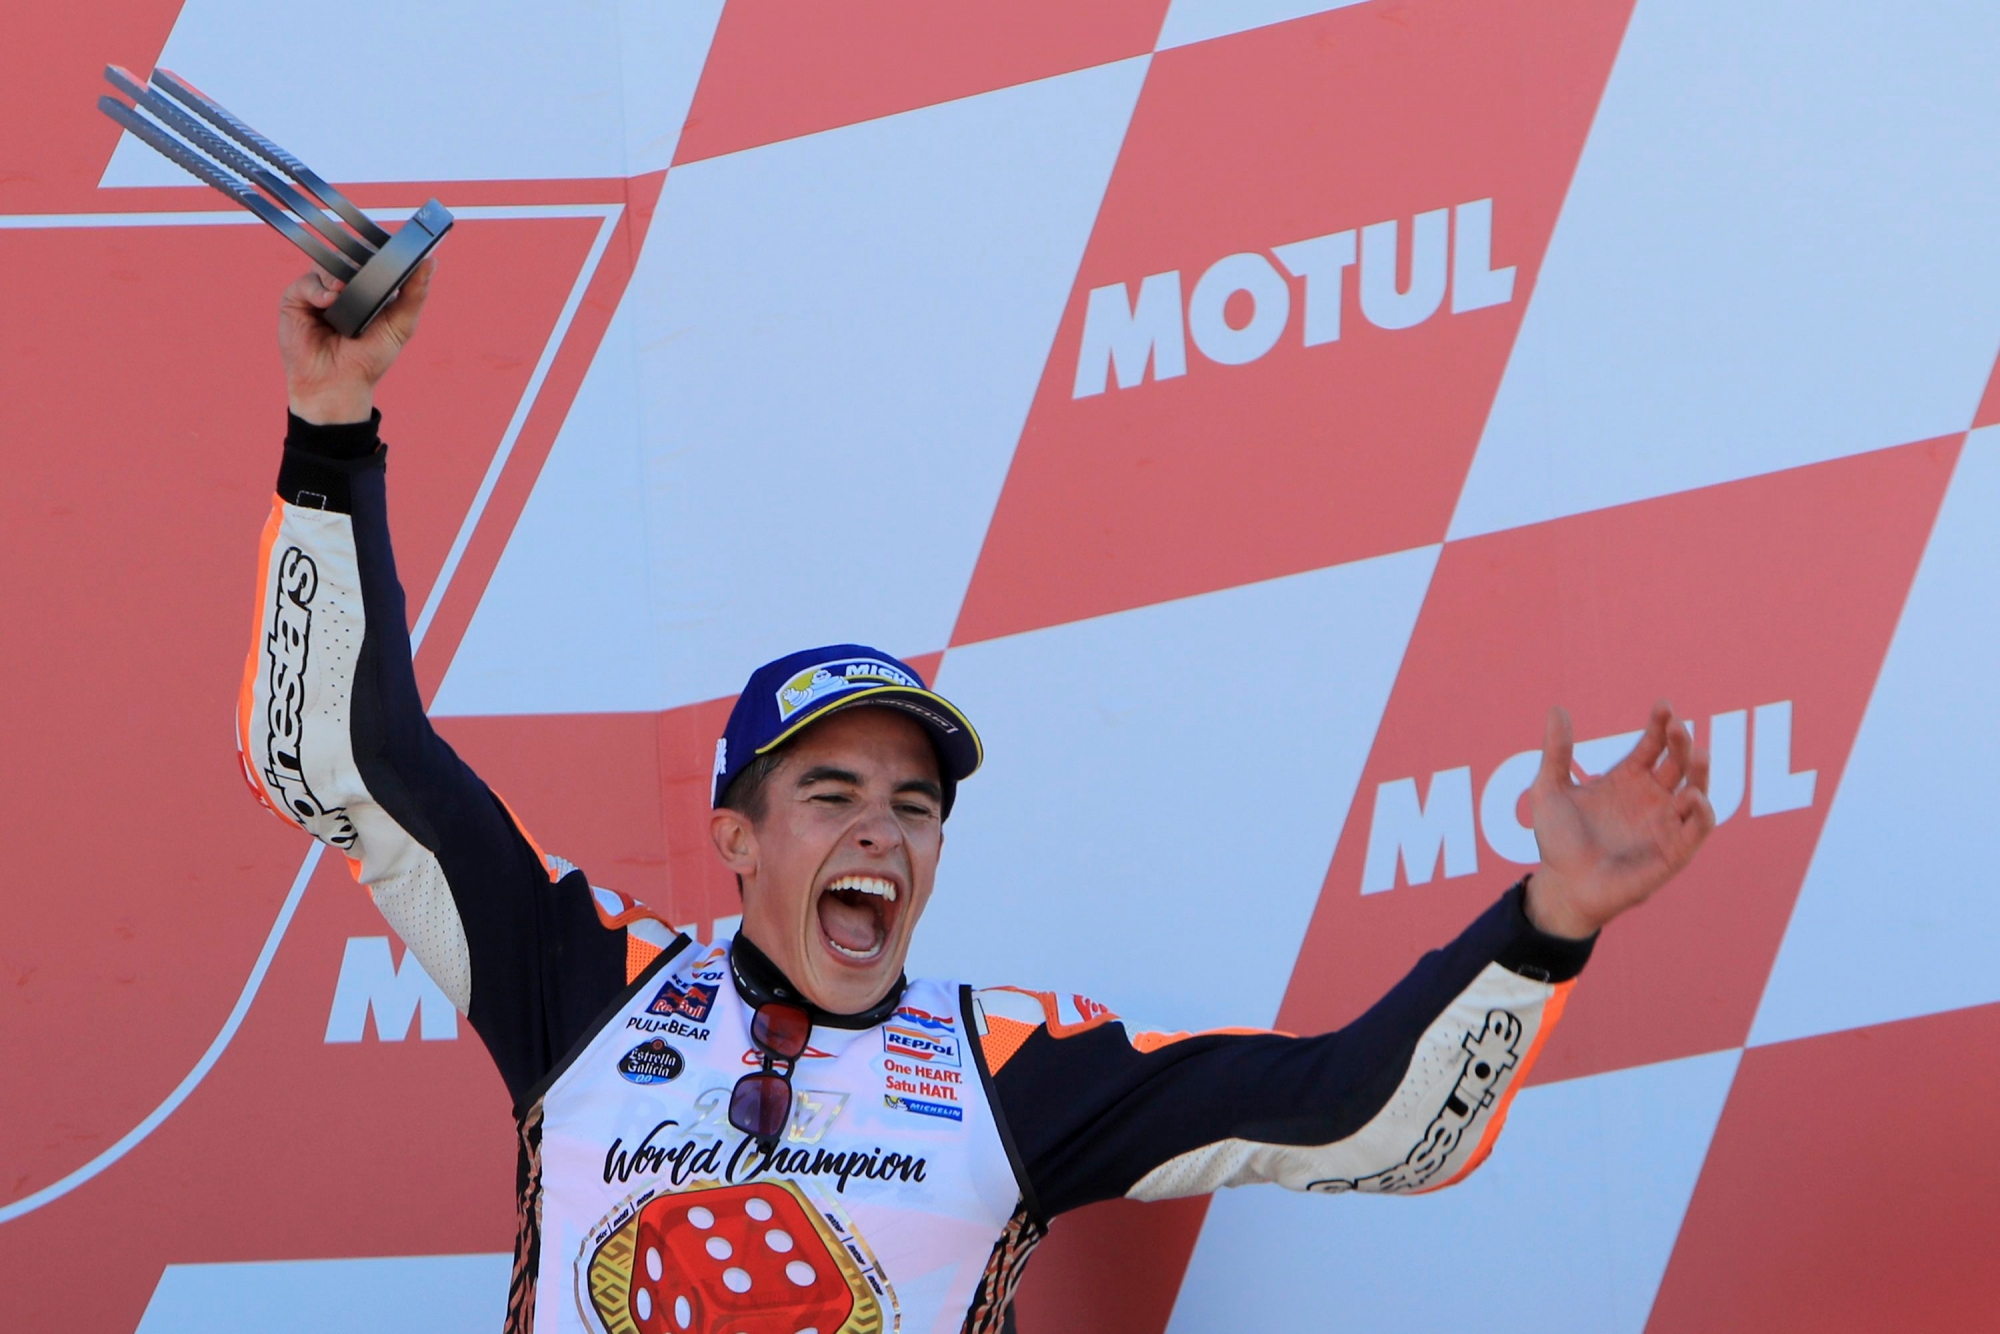 Moto GP World Champion winner Marc Marquez of Spain celebrates on the podium after finishing third at the Valencia Motorcycle Grand Prix, the last race of the season, at the Ricardo Tormo circuit in Cheste near Valencia, Spain, Sunday Nov. 12, 2017. Marquez won his fourth MotoGP world title on Sunday after challenger Andrea Dovizioso crashed during the season-concluding Valencia Grand Prix. (AP Photo/Alberto Saiz) Spain GP Motorcycle Racing